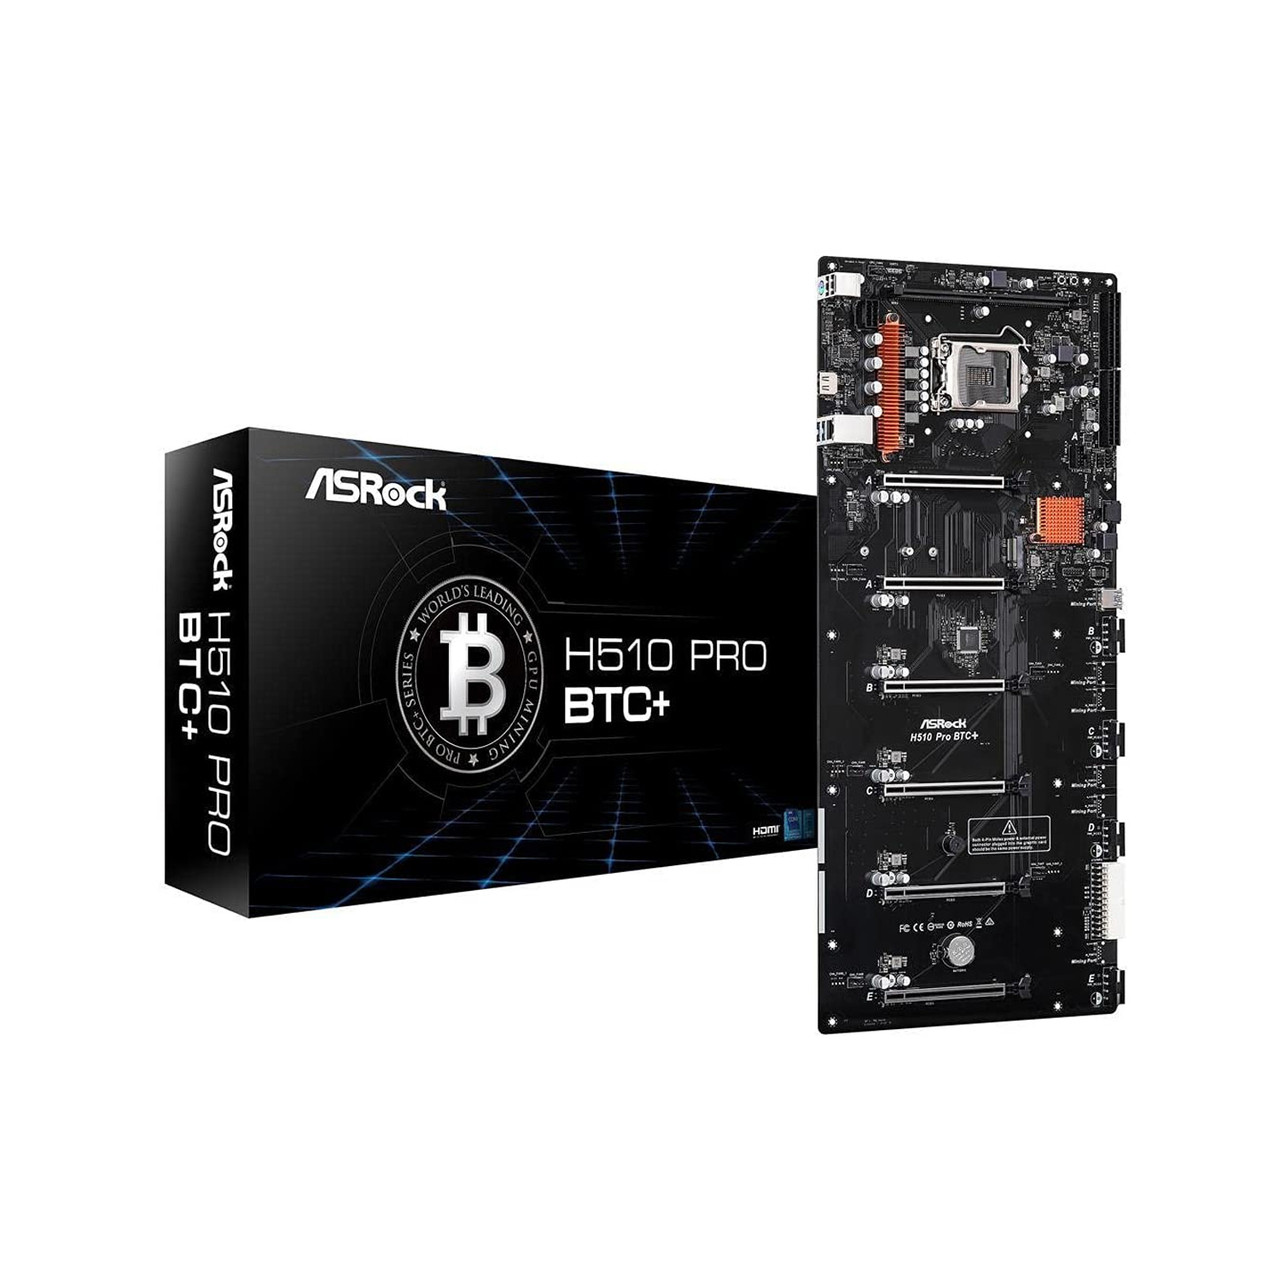 Need Suggestion for motherboard in my mining setup - ASRock Forums - Page 2